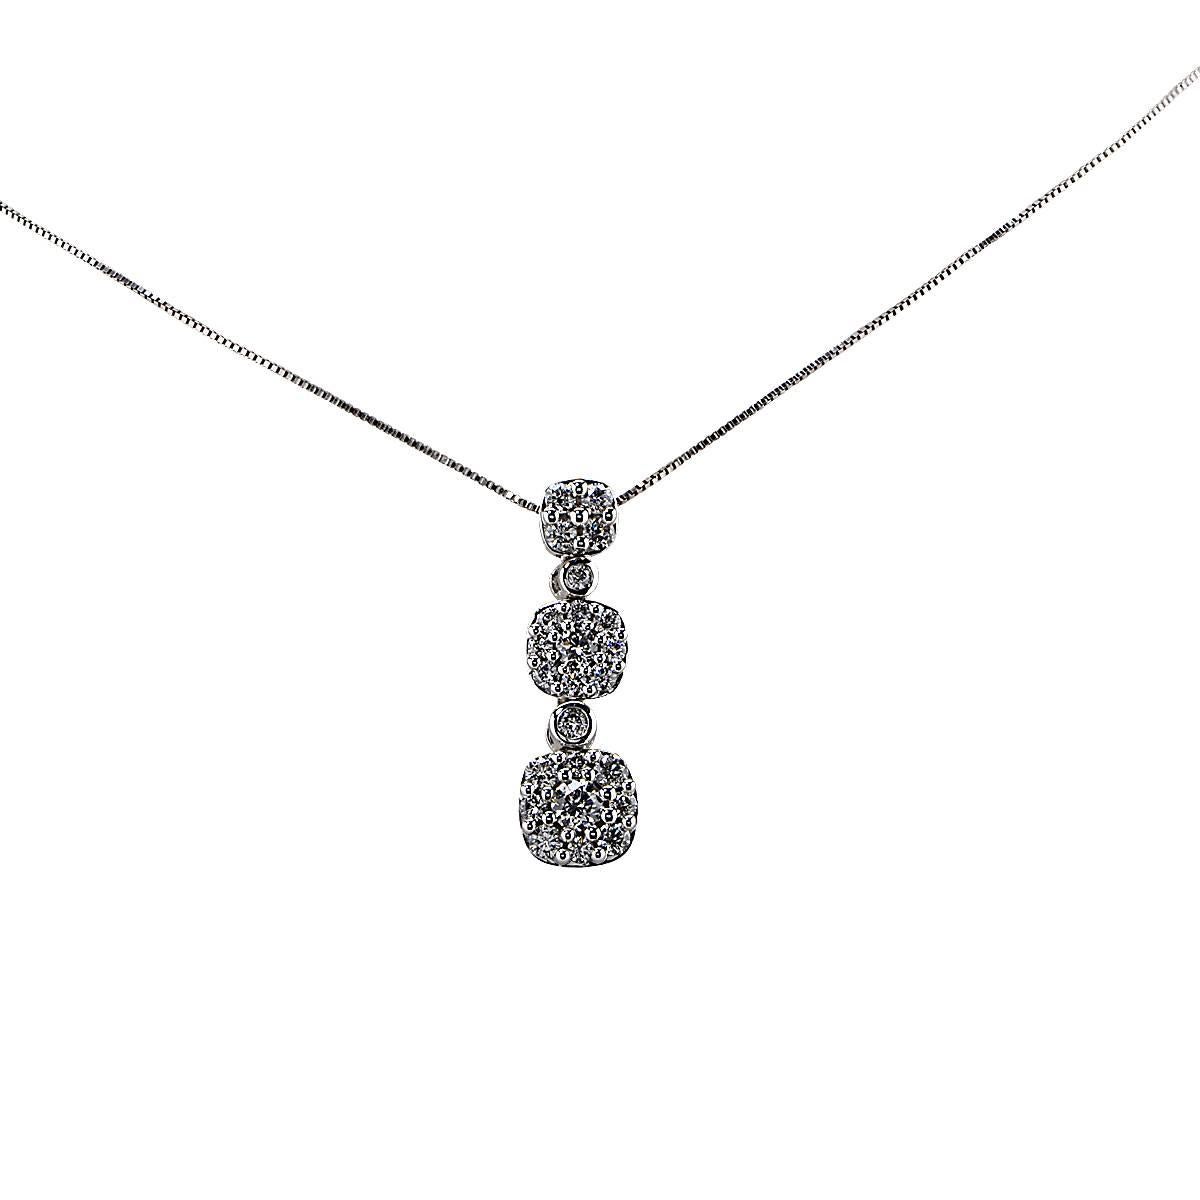 Beautiful 14k white gold necklace featuring 1.00cts of round brilliant cut diamonds, G color, VS clarity.

Metal weight: 4.35 grams

The diamond necklace and pendant are accompanied by a retail appraisal performed by a Graduate Gemologist.